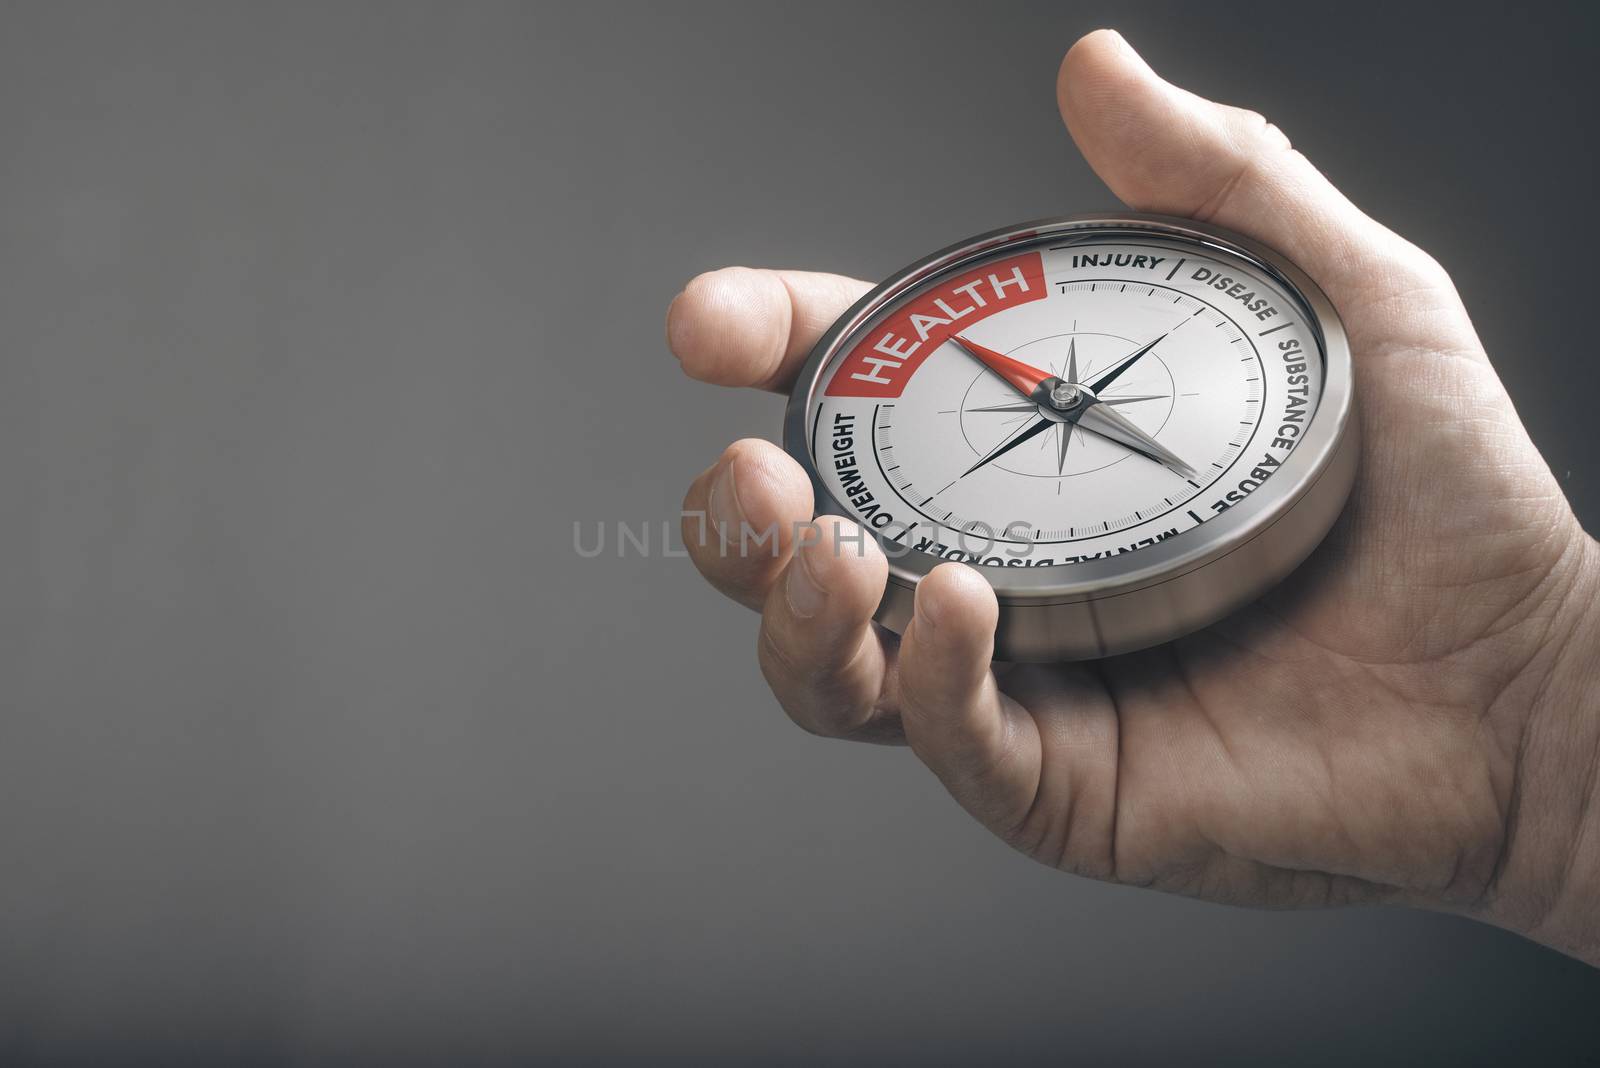 Hand holding a compass with needle pointing the word health. Healthcare concept. Composite image between a hand photography and a 3D object.